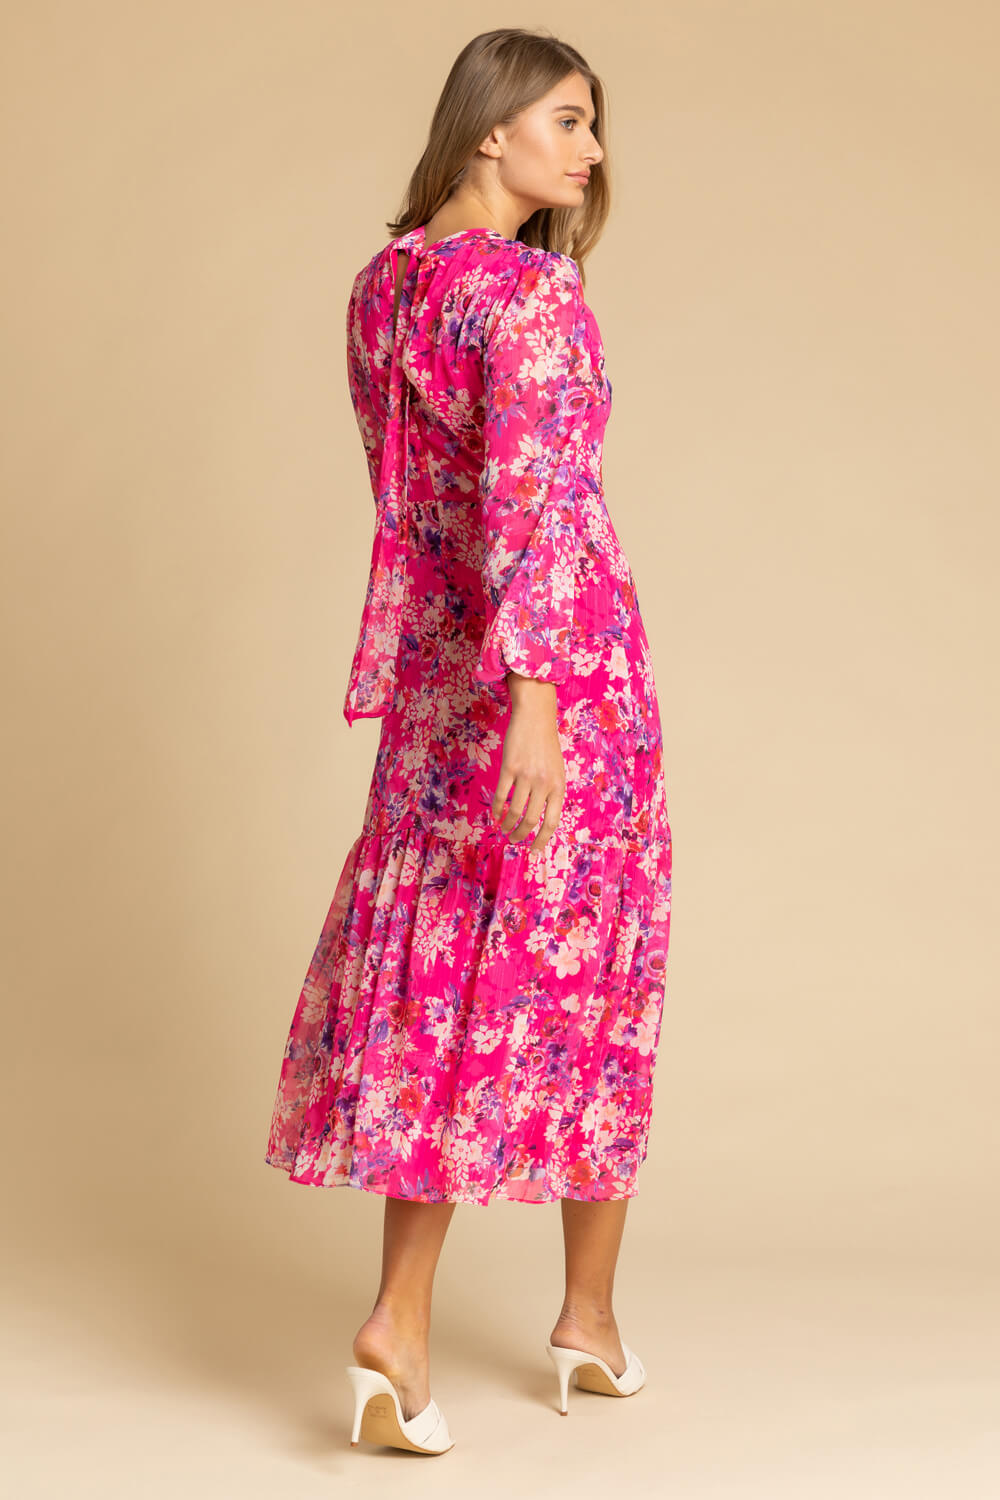 PINK Floral Print Tiered Keyhole Midi Dress, Image 2 of 5